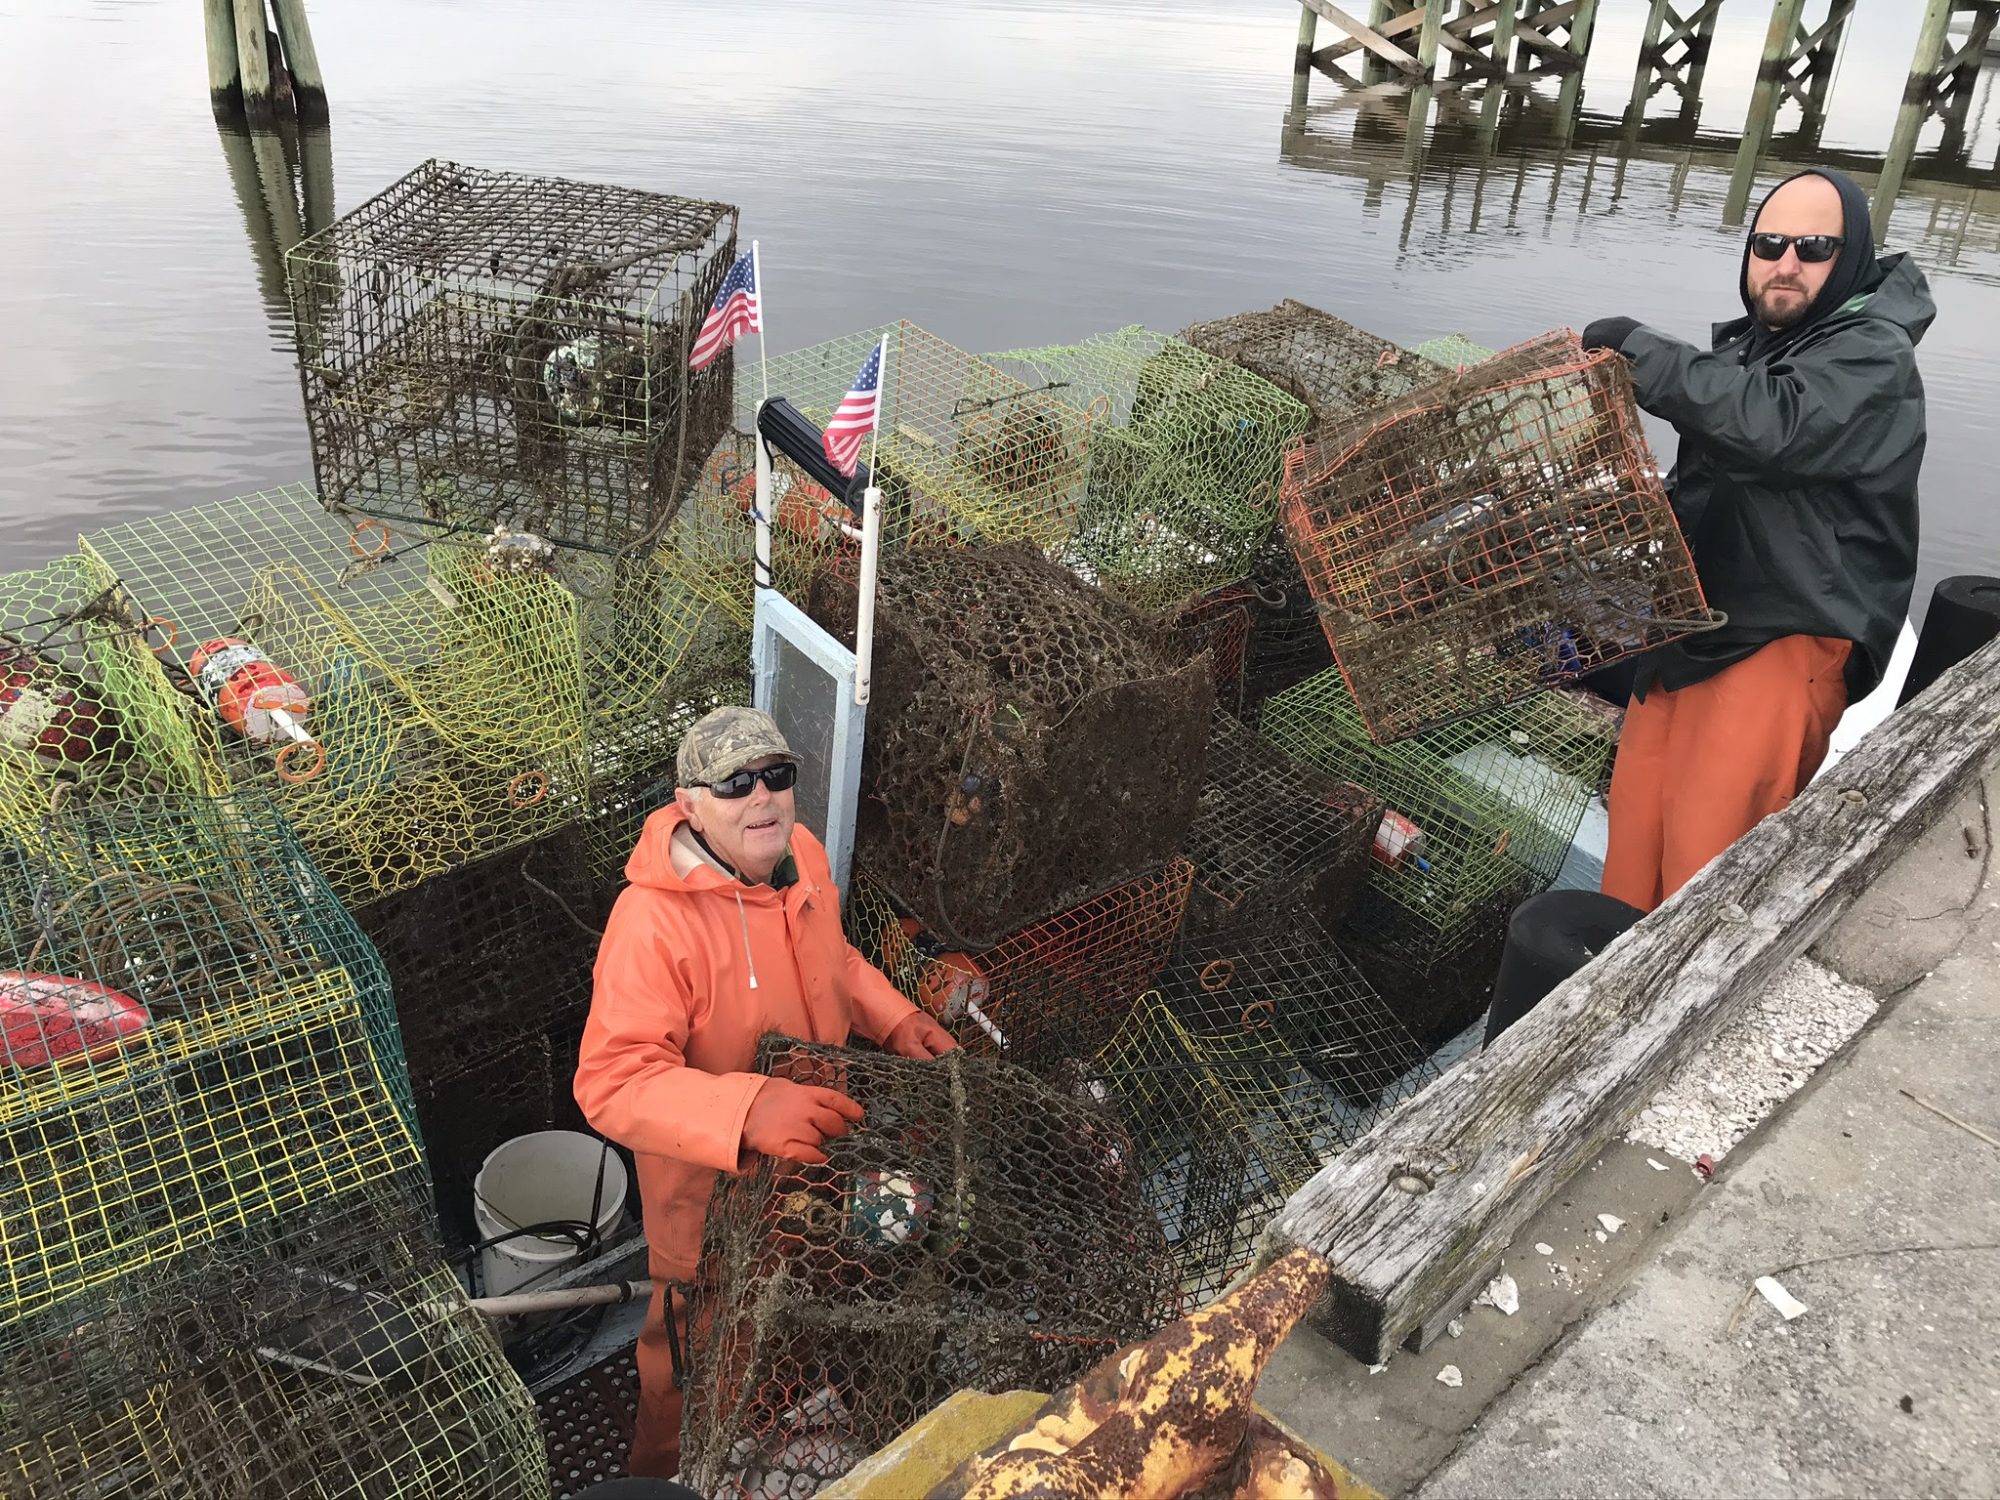 Results and Reflections on the 2021 Lost Fishing Gear Recovery Project